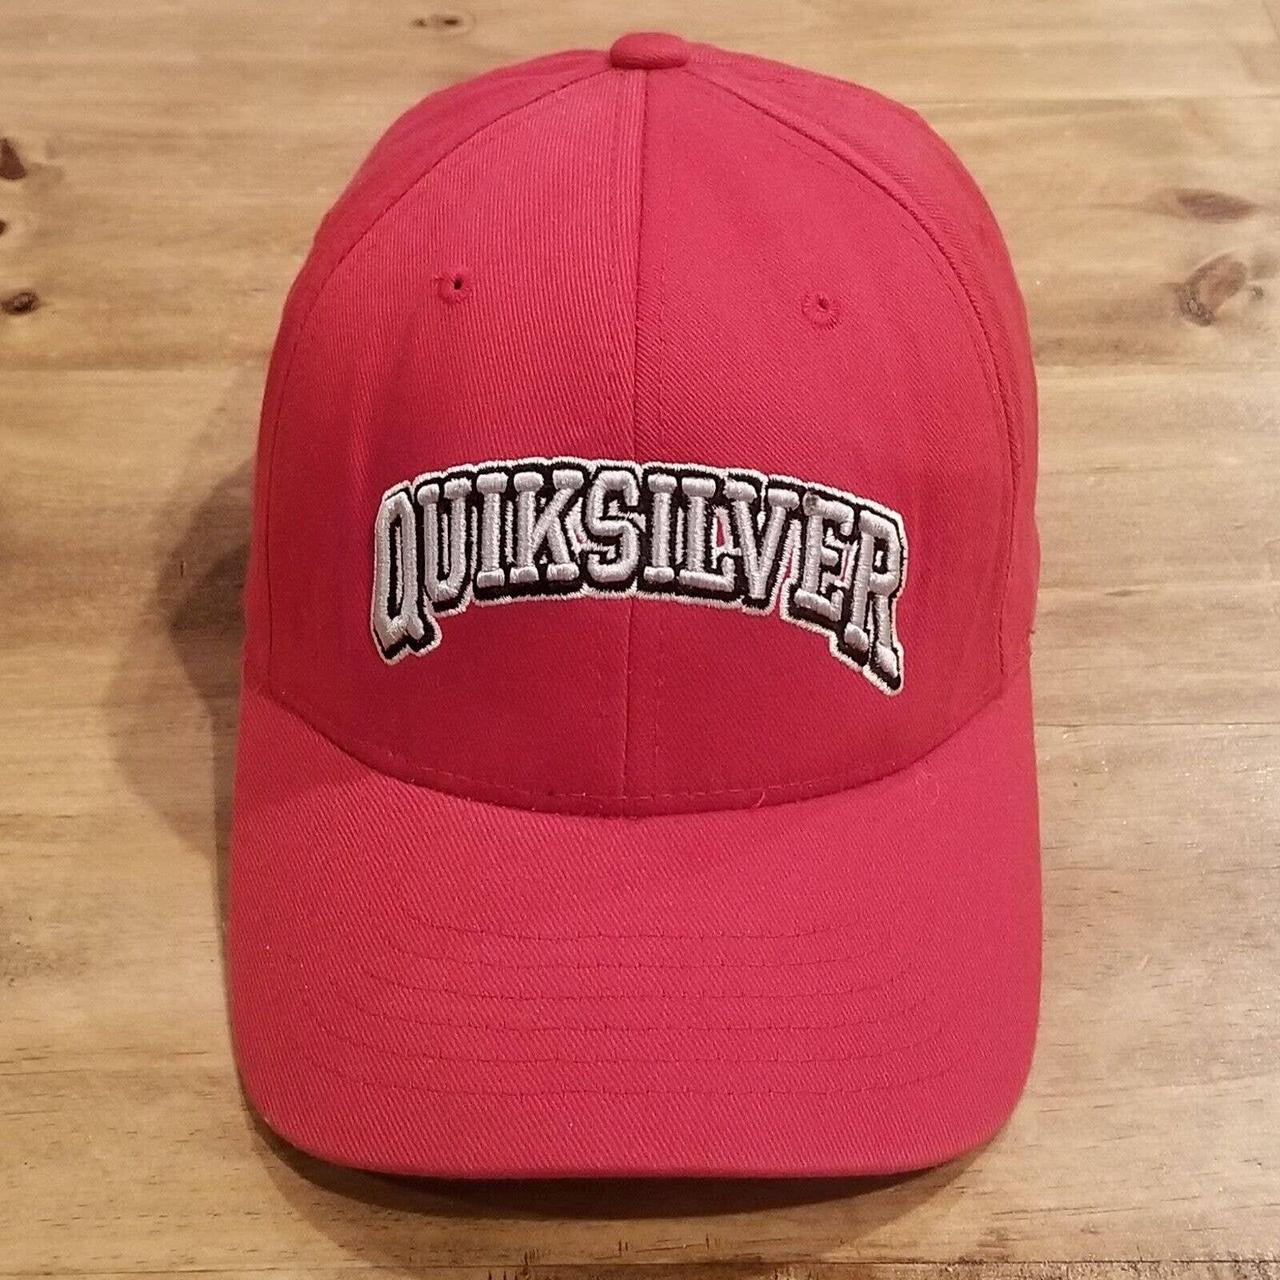 QuikSilver Hat - Size Out Red Spell Depop Flex... Cap One